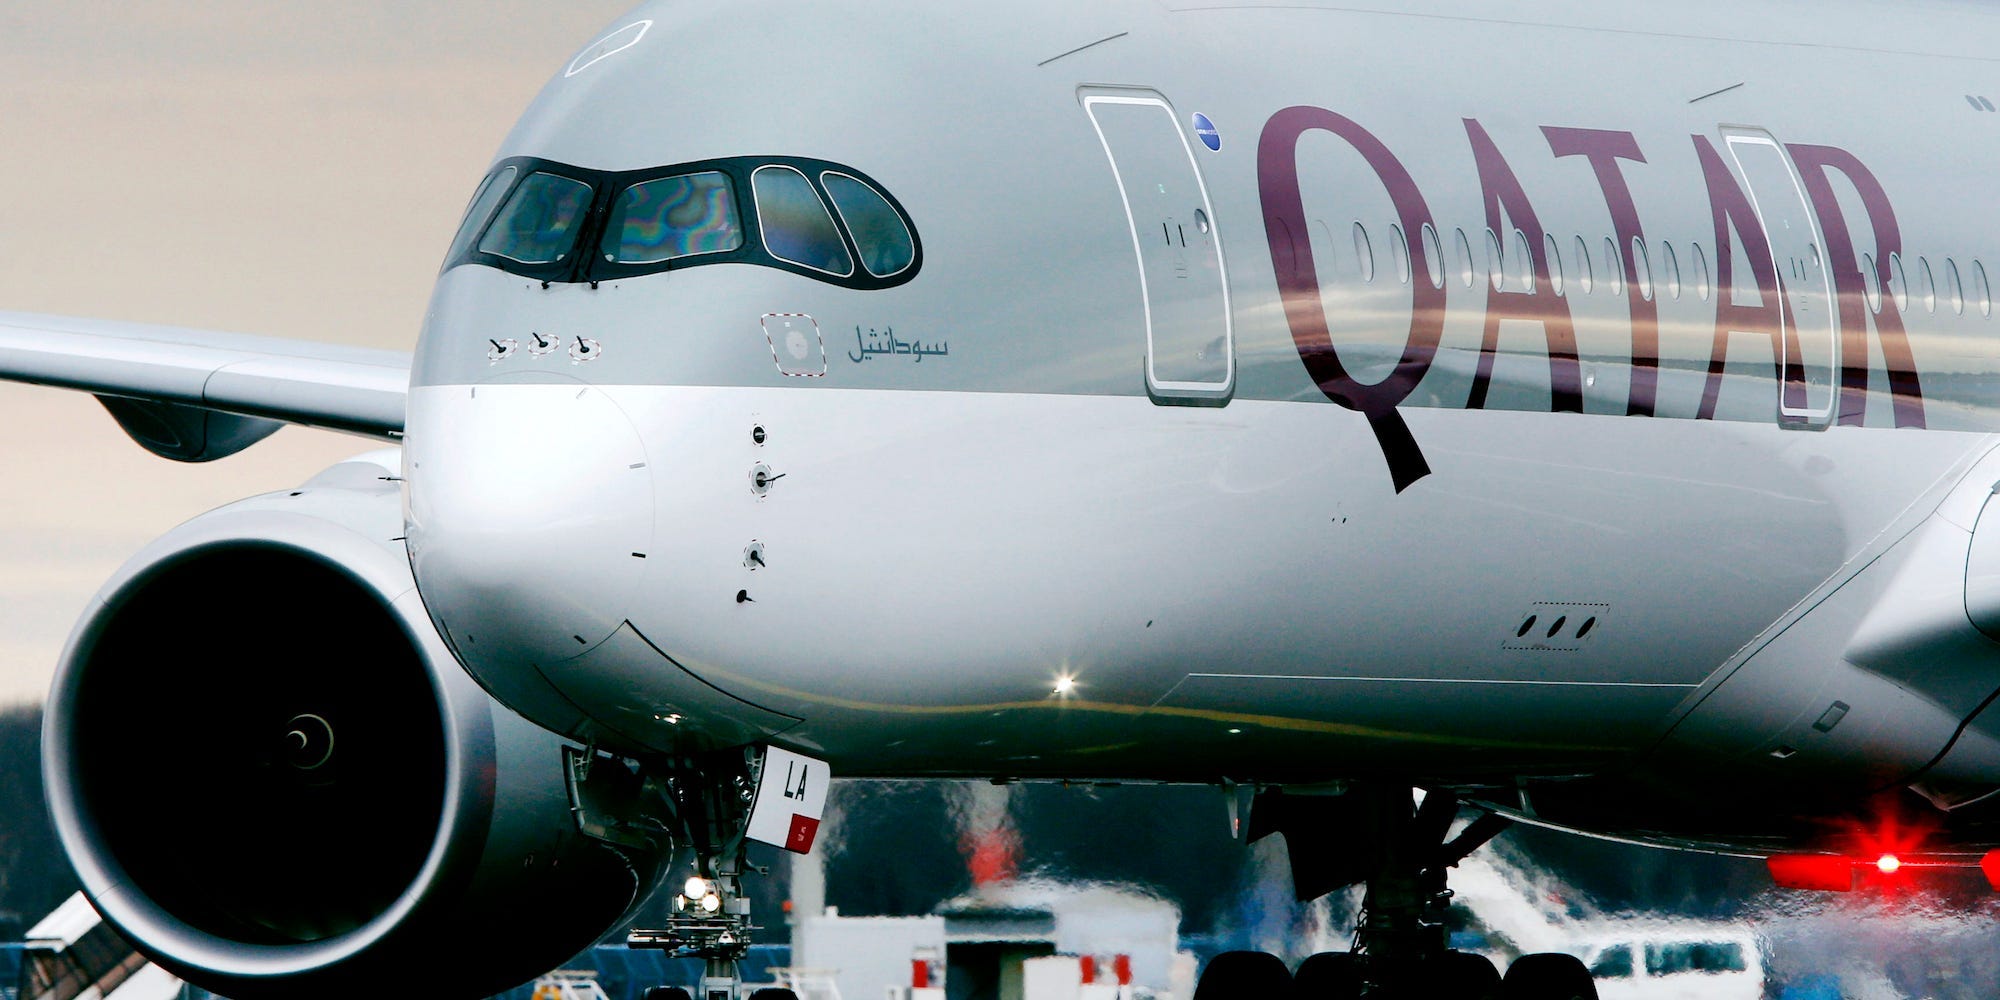 The front of a Qatar Airways plane.